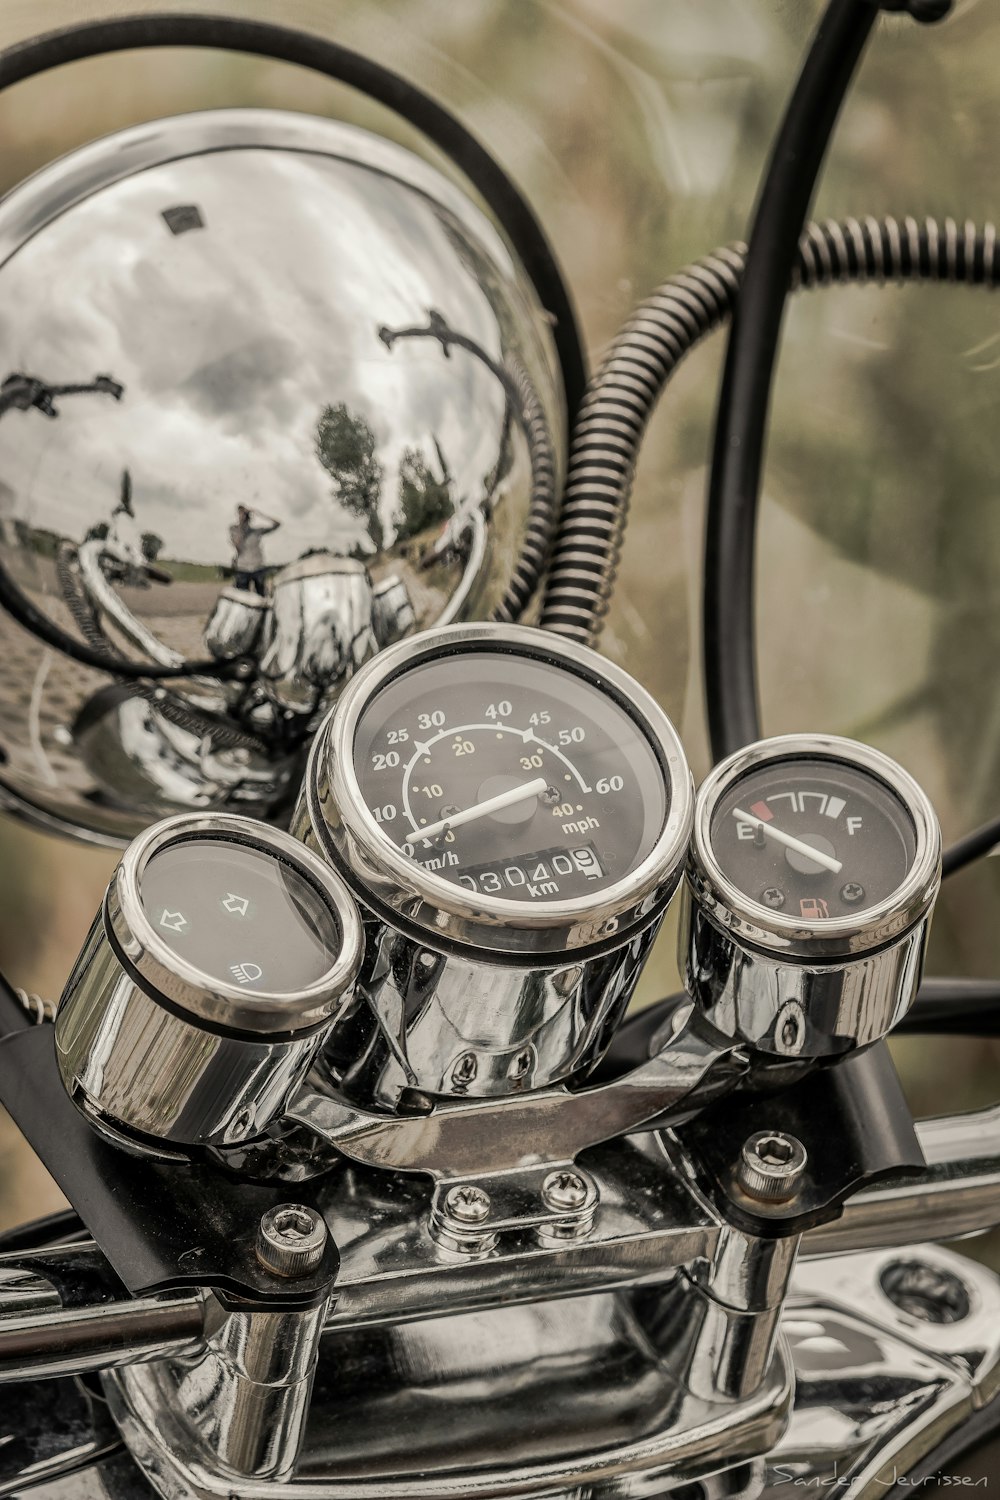 a close up of the gauges on a motorcycle